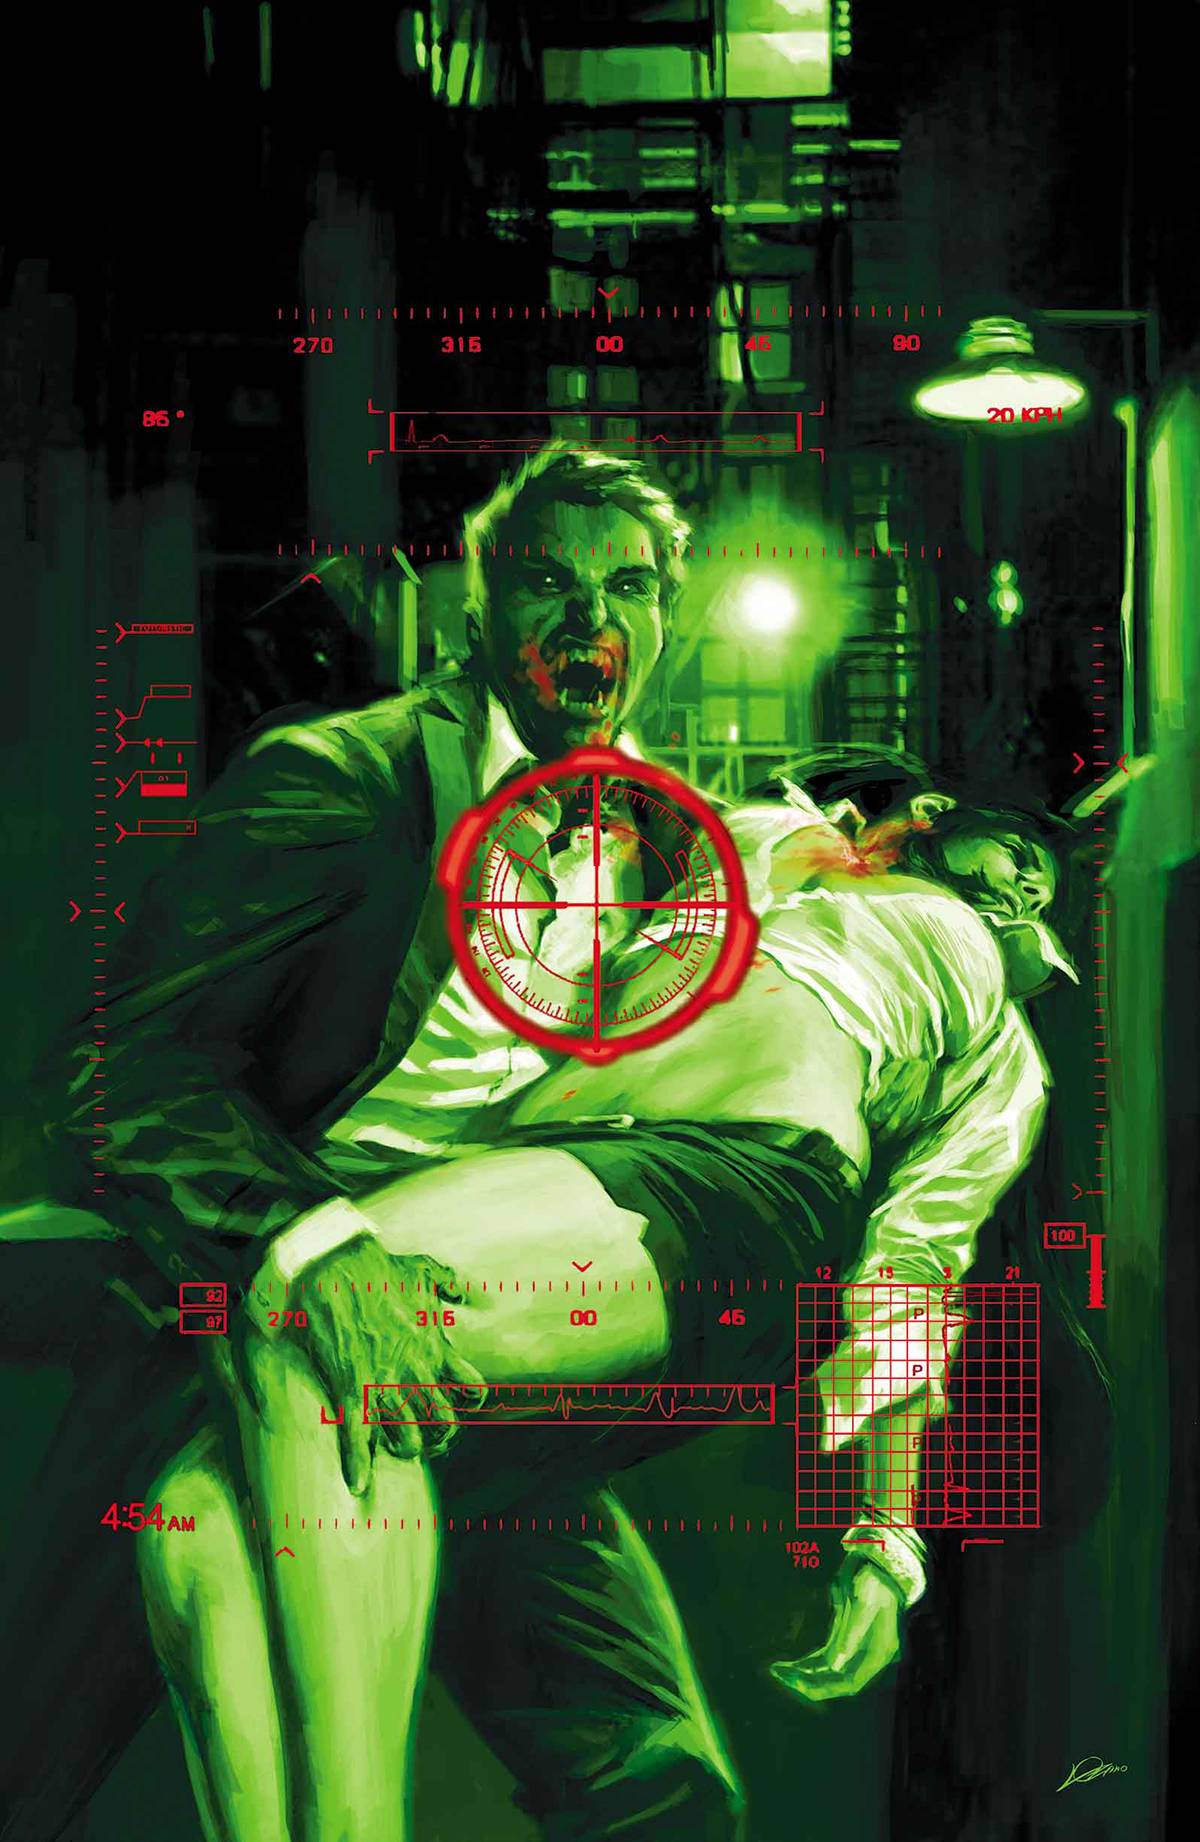 George Romero's Empire of the Dead Act Two #1 (2014)